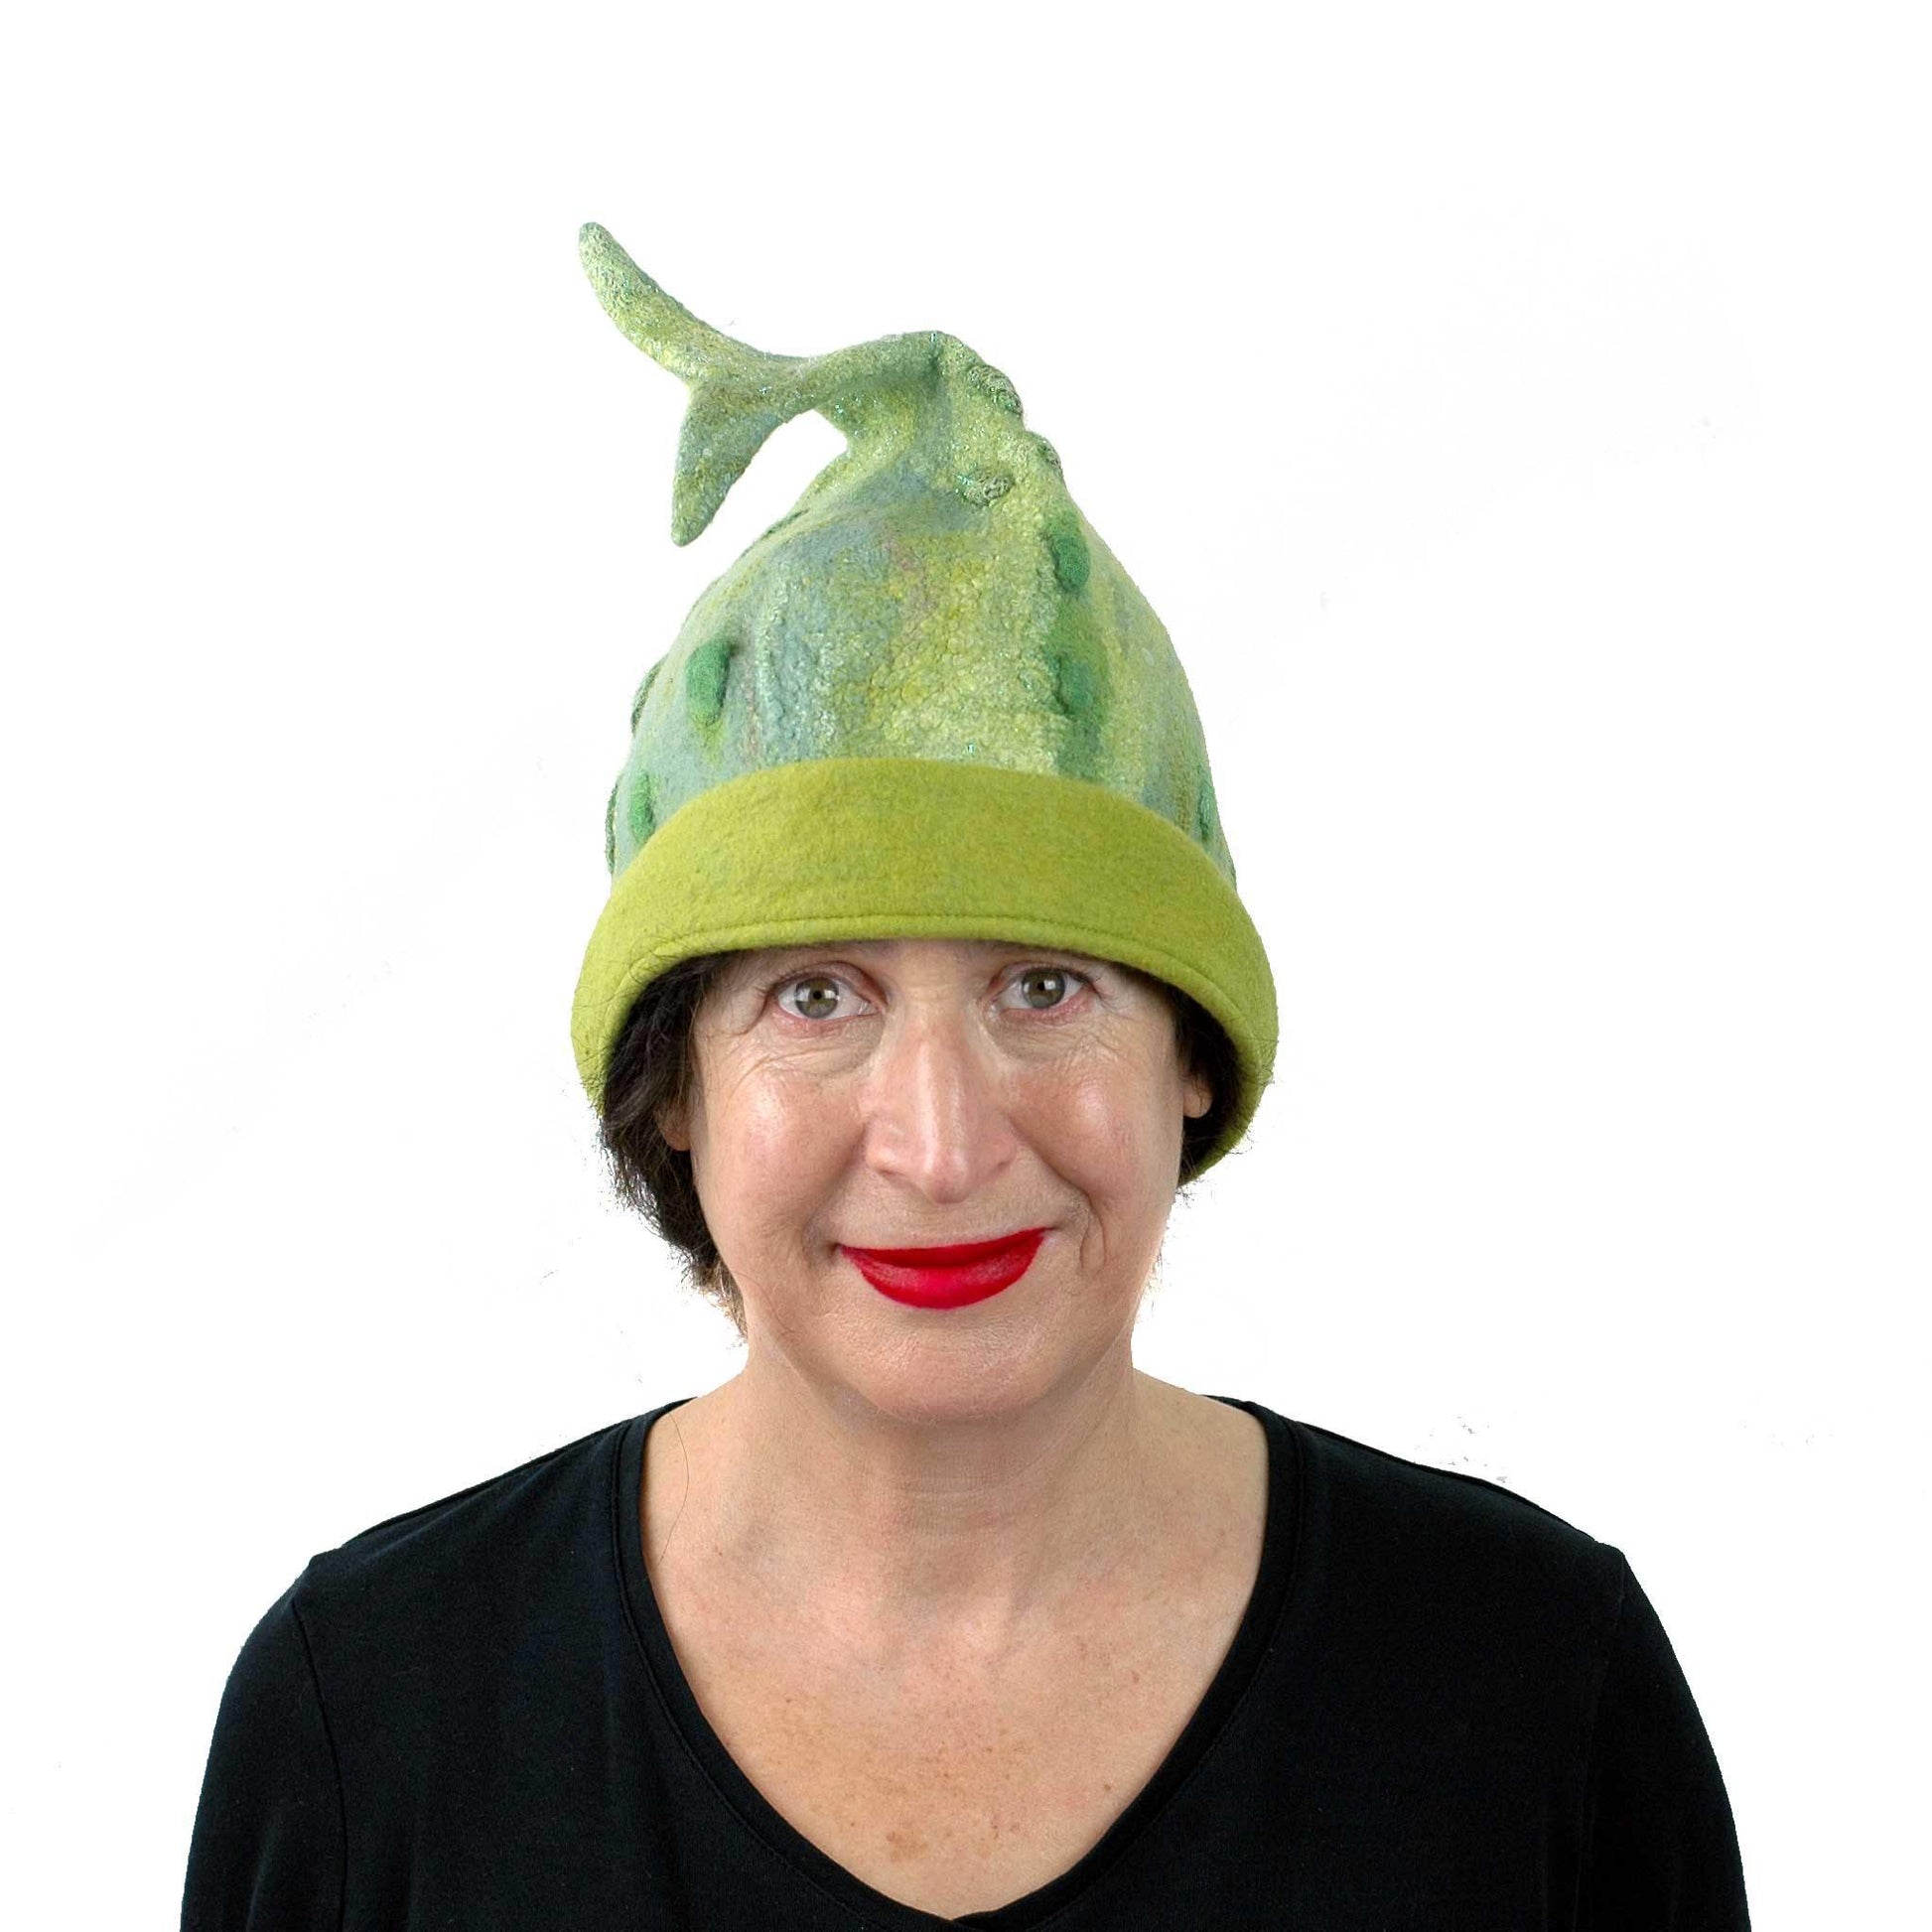 Felted Beanie Hat in Lime Green Wool - Large Size -front view